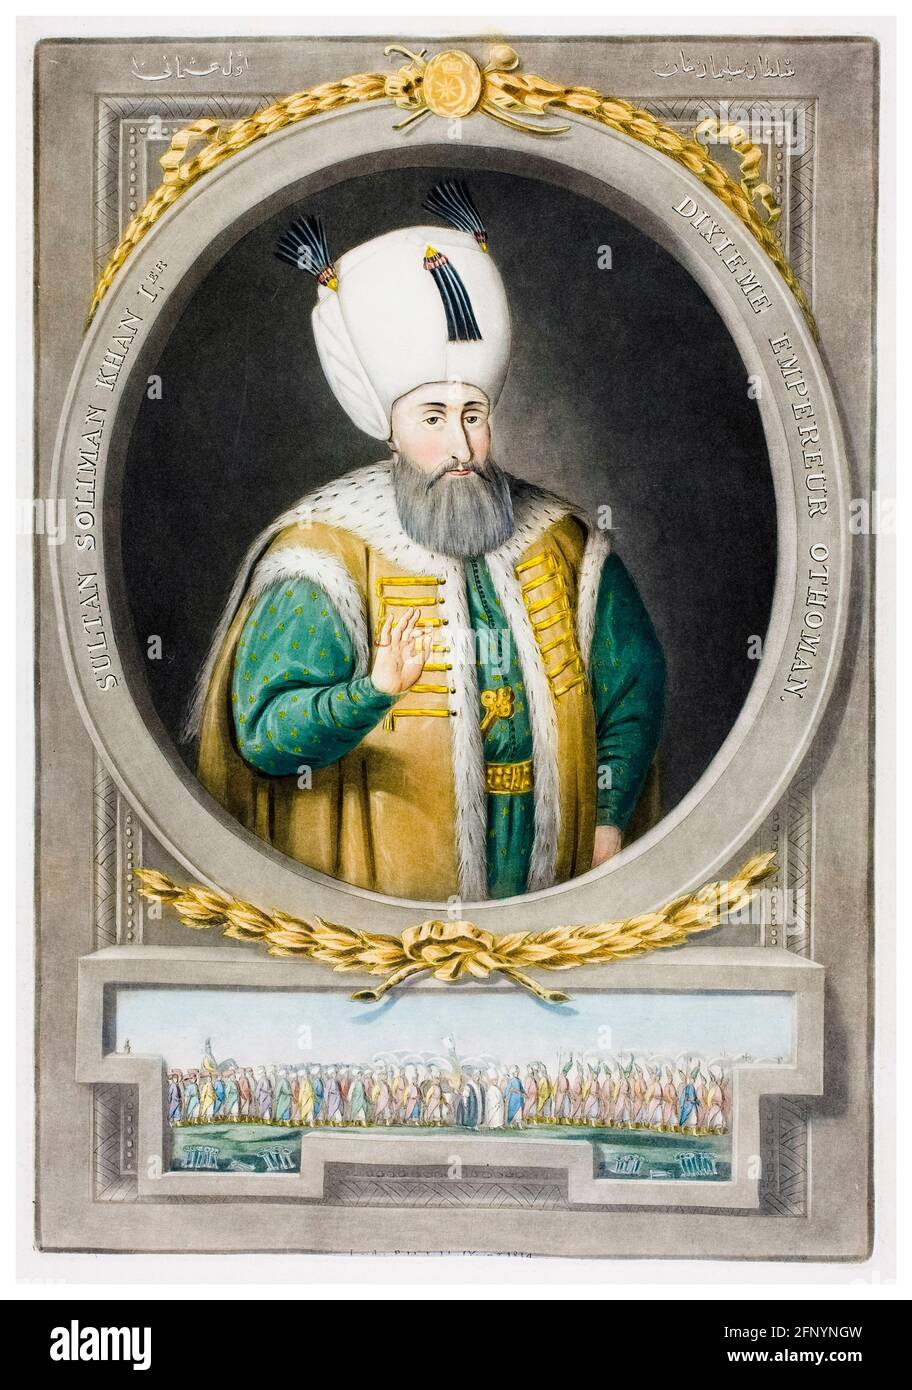 Suleyman I of Turkey (Suleiman the Magnificent) (1494-1566), 10th Sultan of the Ottoman Empire (1520-1566), portrait engraving by John Young, 1815 Stock Photo